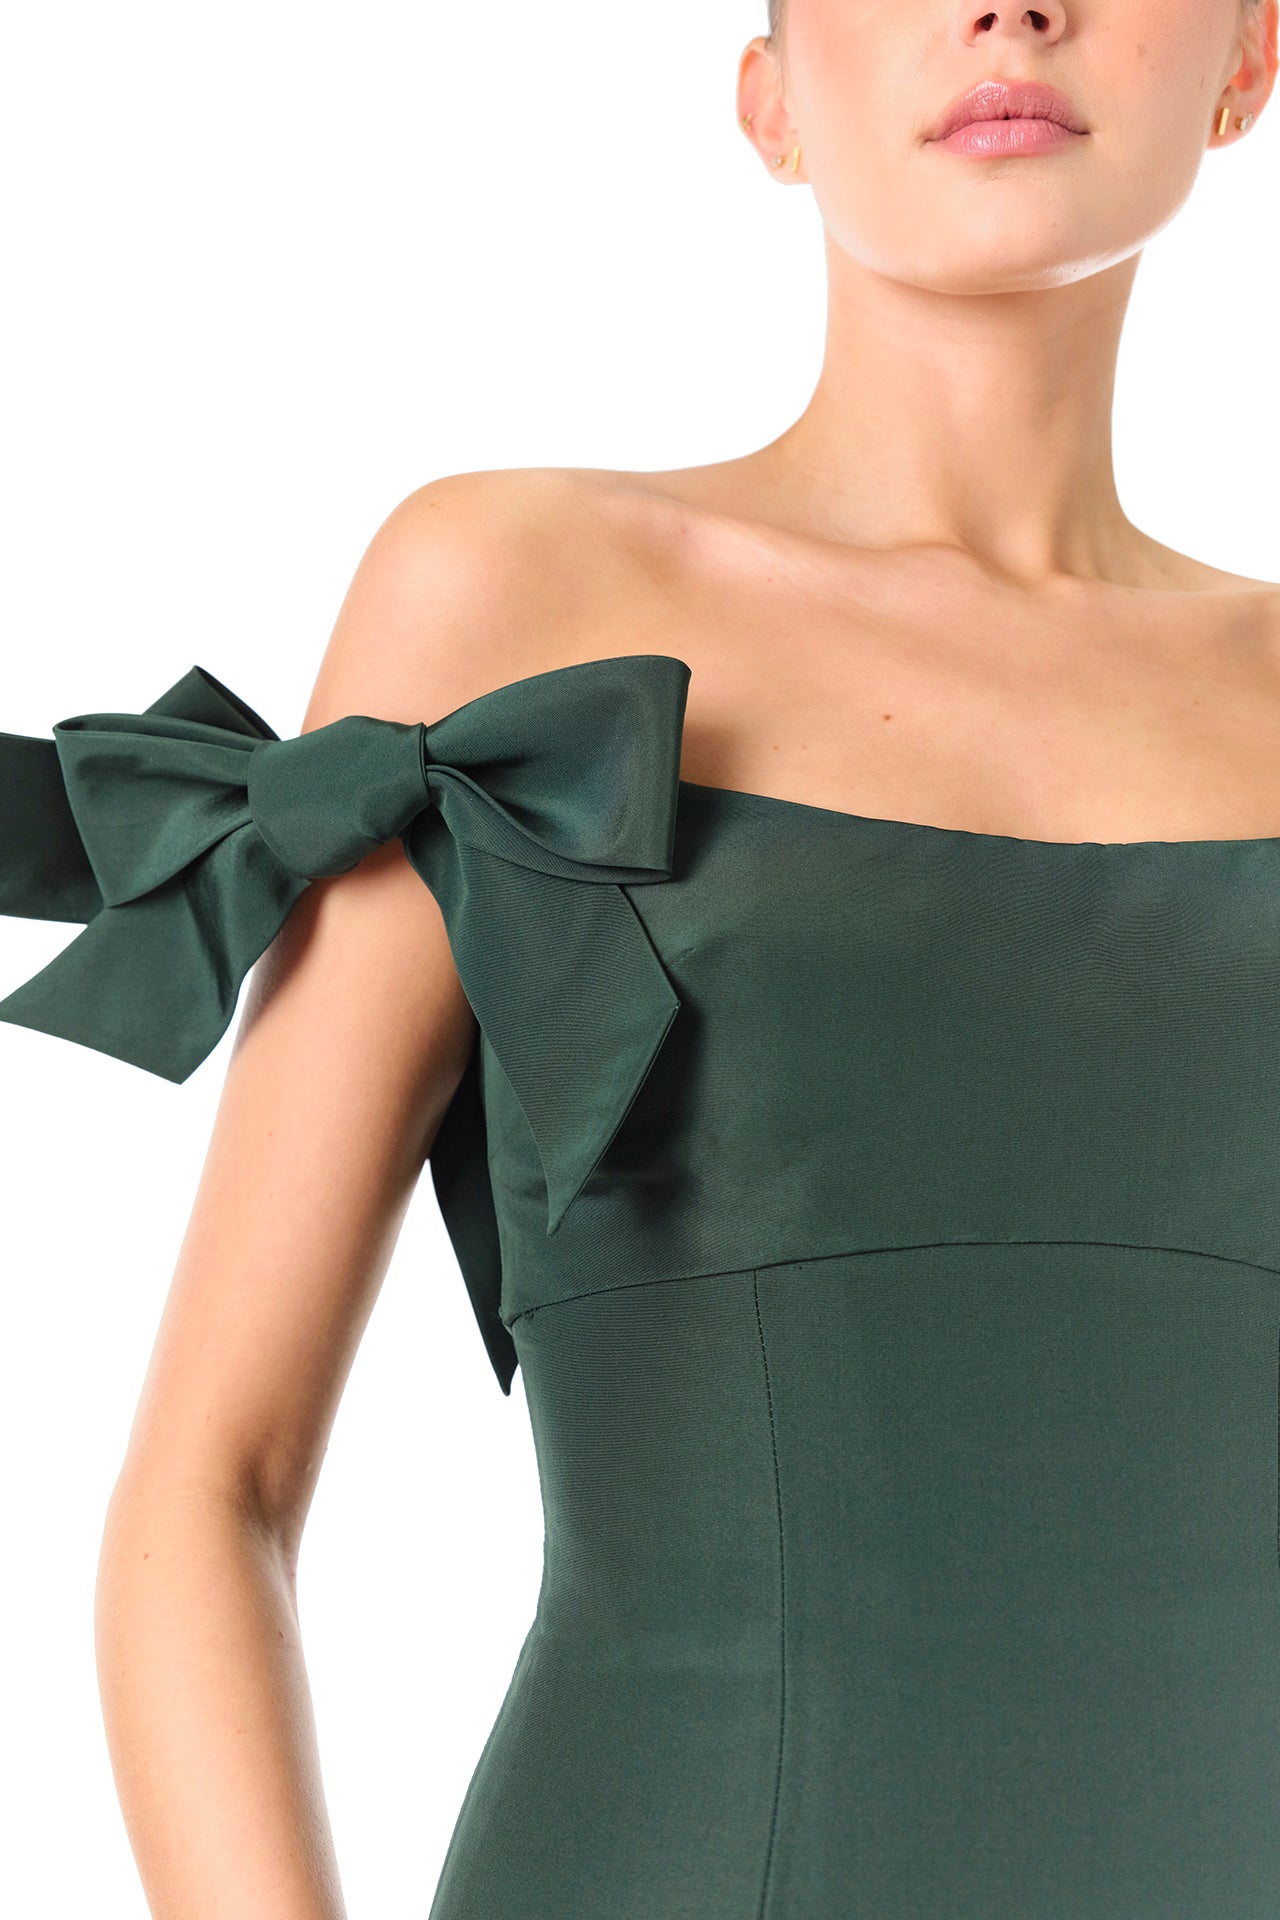 Monique Lhuillier Fall 2024 off the shoulder gown with trumpet skirt and bow sleeves in Juniper green faille fabric - bow detail.